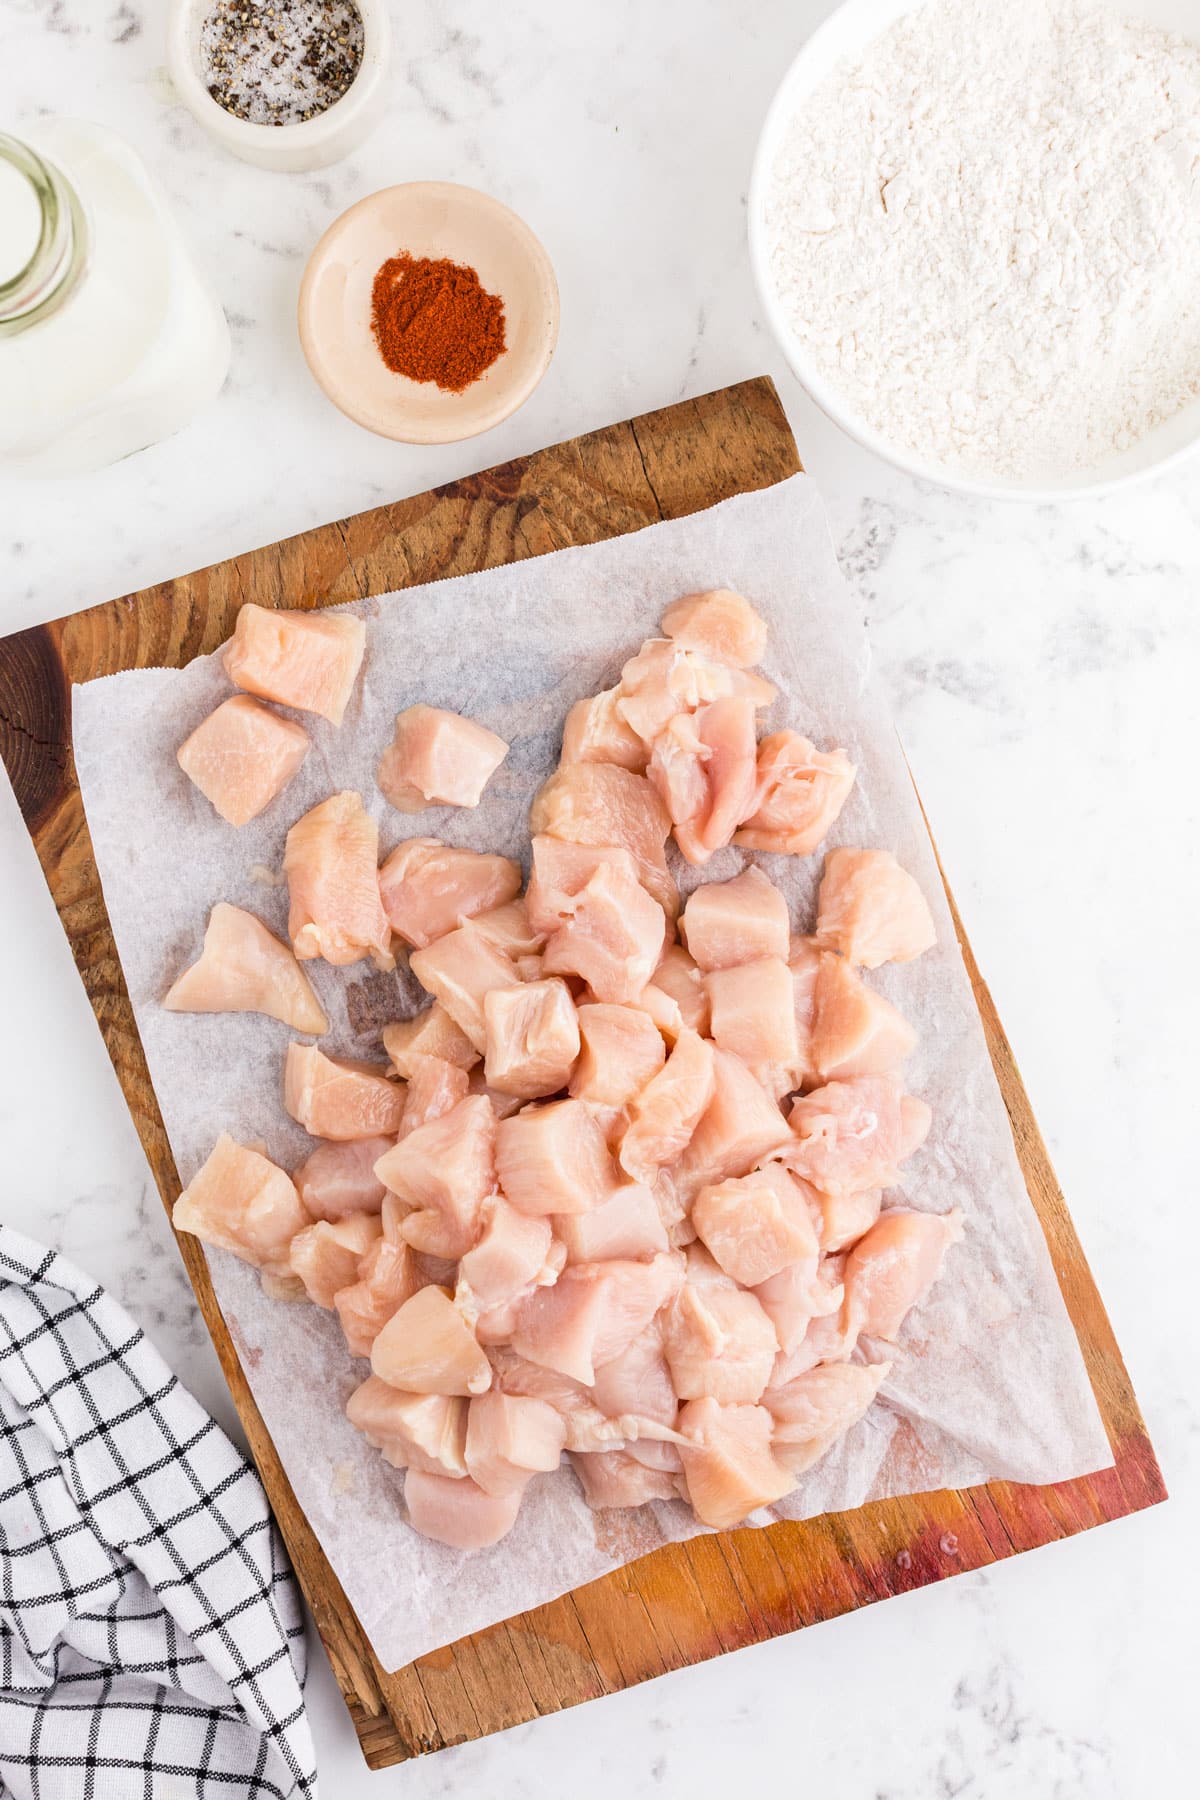 Diced chicken pieces on parchment-lined wooden kitchen board, dredging ingredients surrounding the chicken.